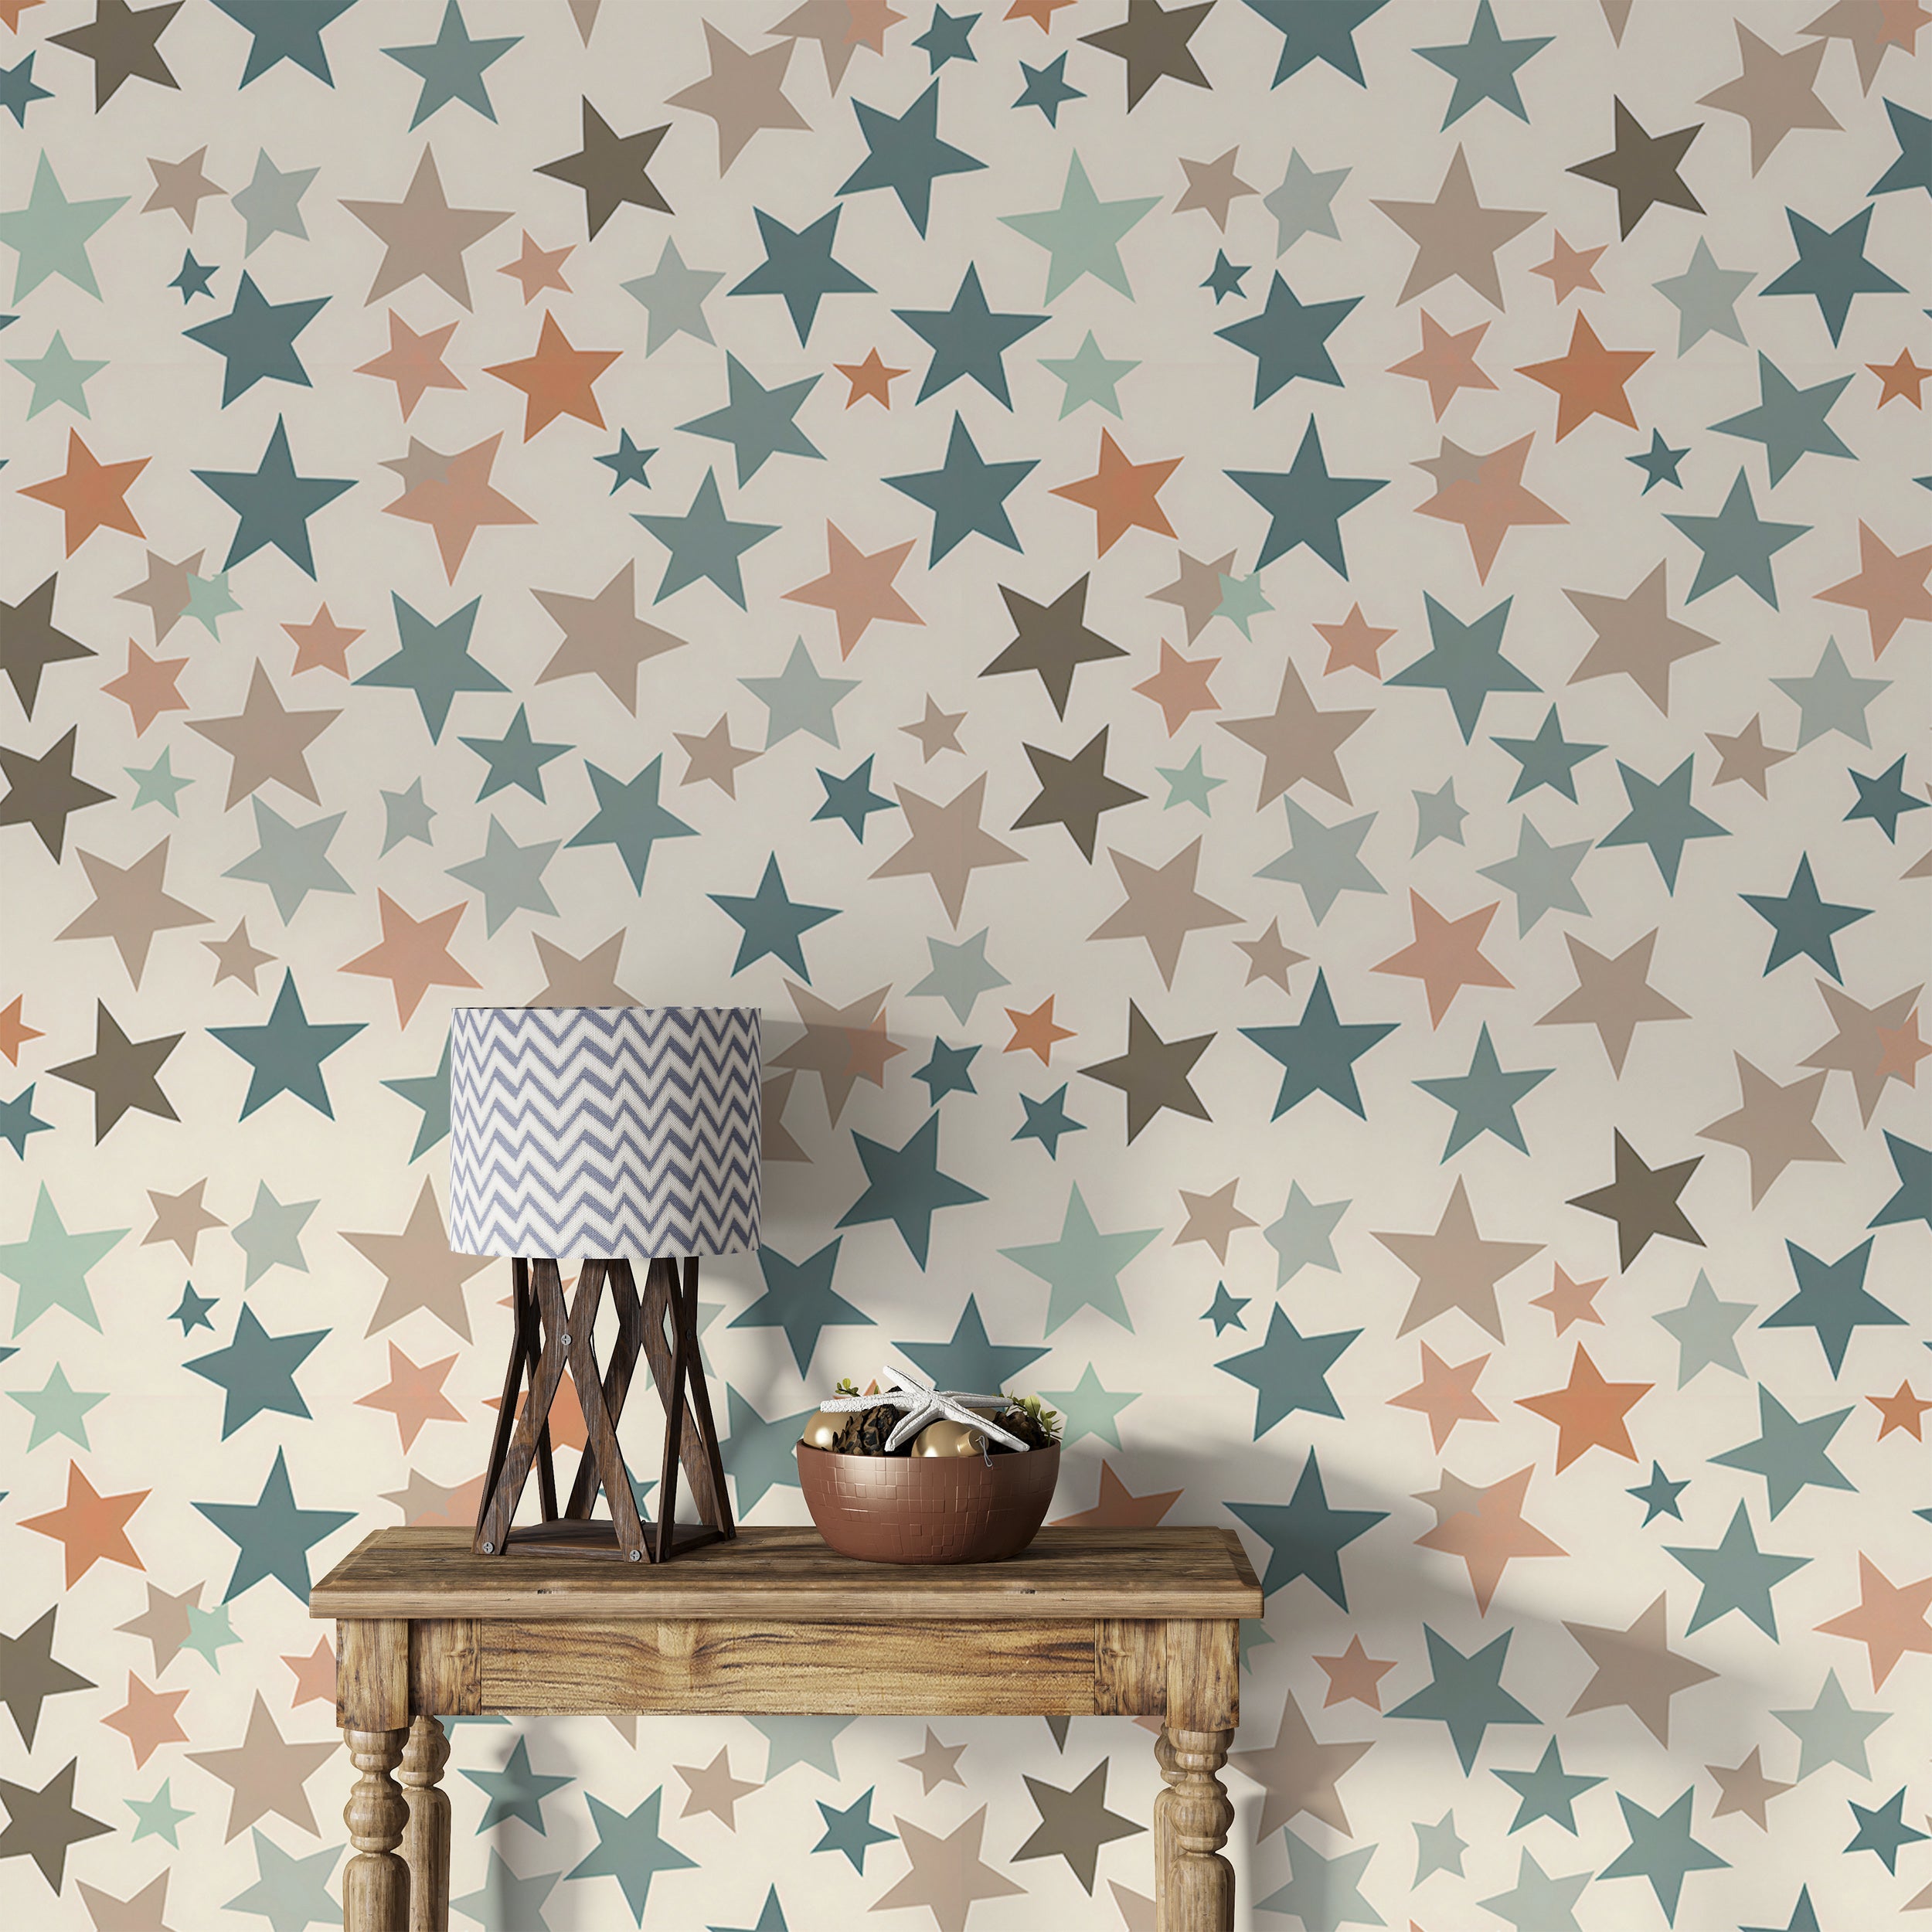 Boho Stars Wallpaper, Colorful Starry Wallpaper, Peel and Stick Pastel Colors Nursery Wall Decor, Removable Stars